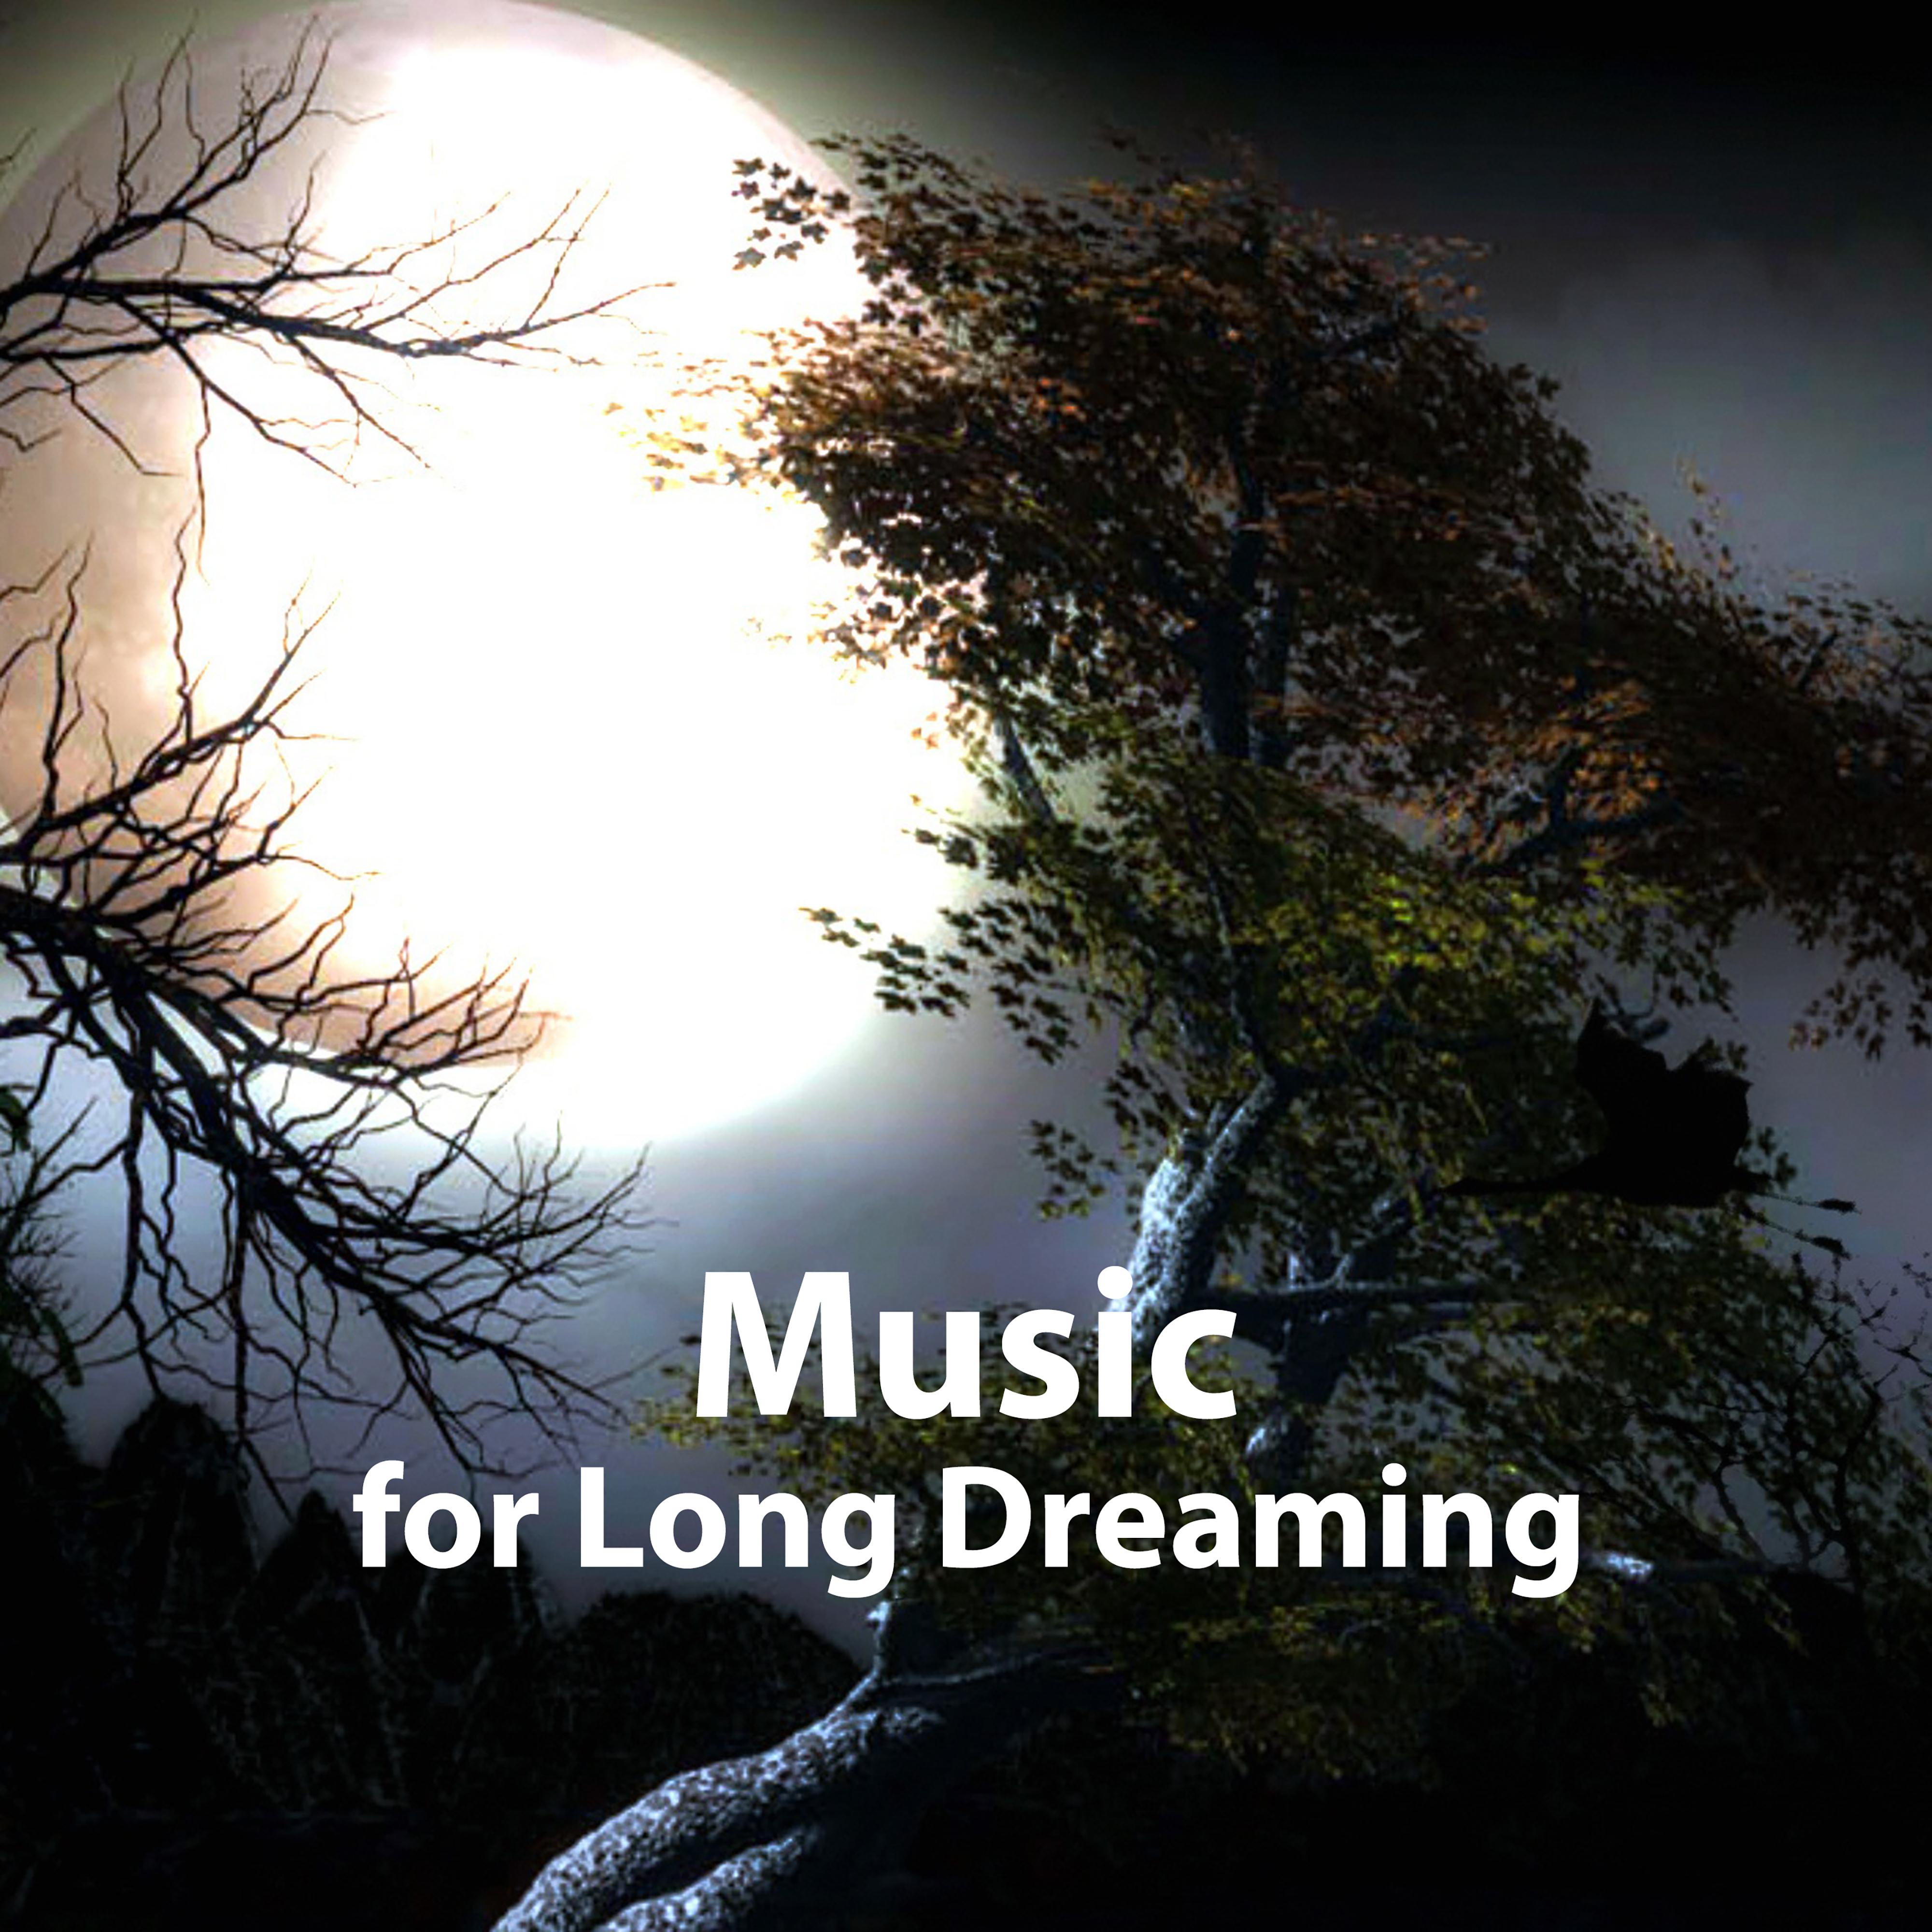 Music for Long Dreaming  Sleep Well, Calming Sounds, Night Relaxation, New Age Music